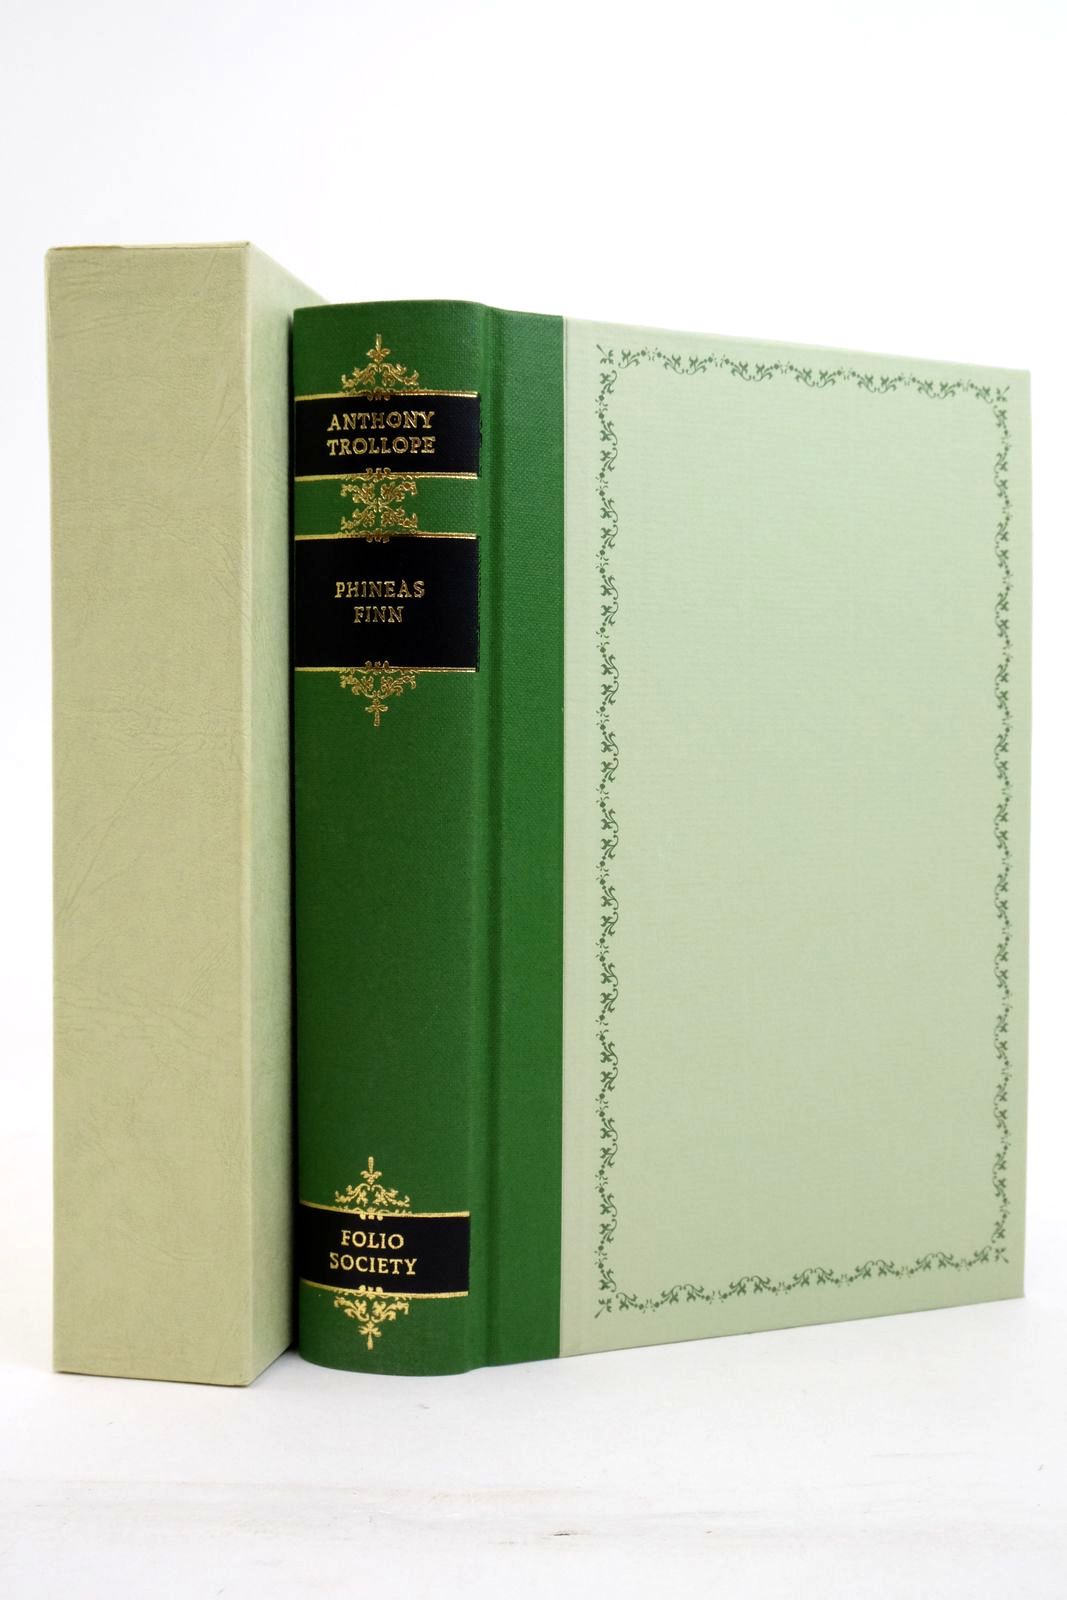 Photo of PHINEAS FINN: THE IRISH MEMBER written by Trollope, Anthony Powell, J. Enoch illustrated by Thomas, Llewellyn published by Folio Society (STOCK CODE: 2138253)  for sale by Stella & Rose's Books